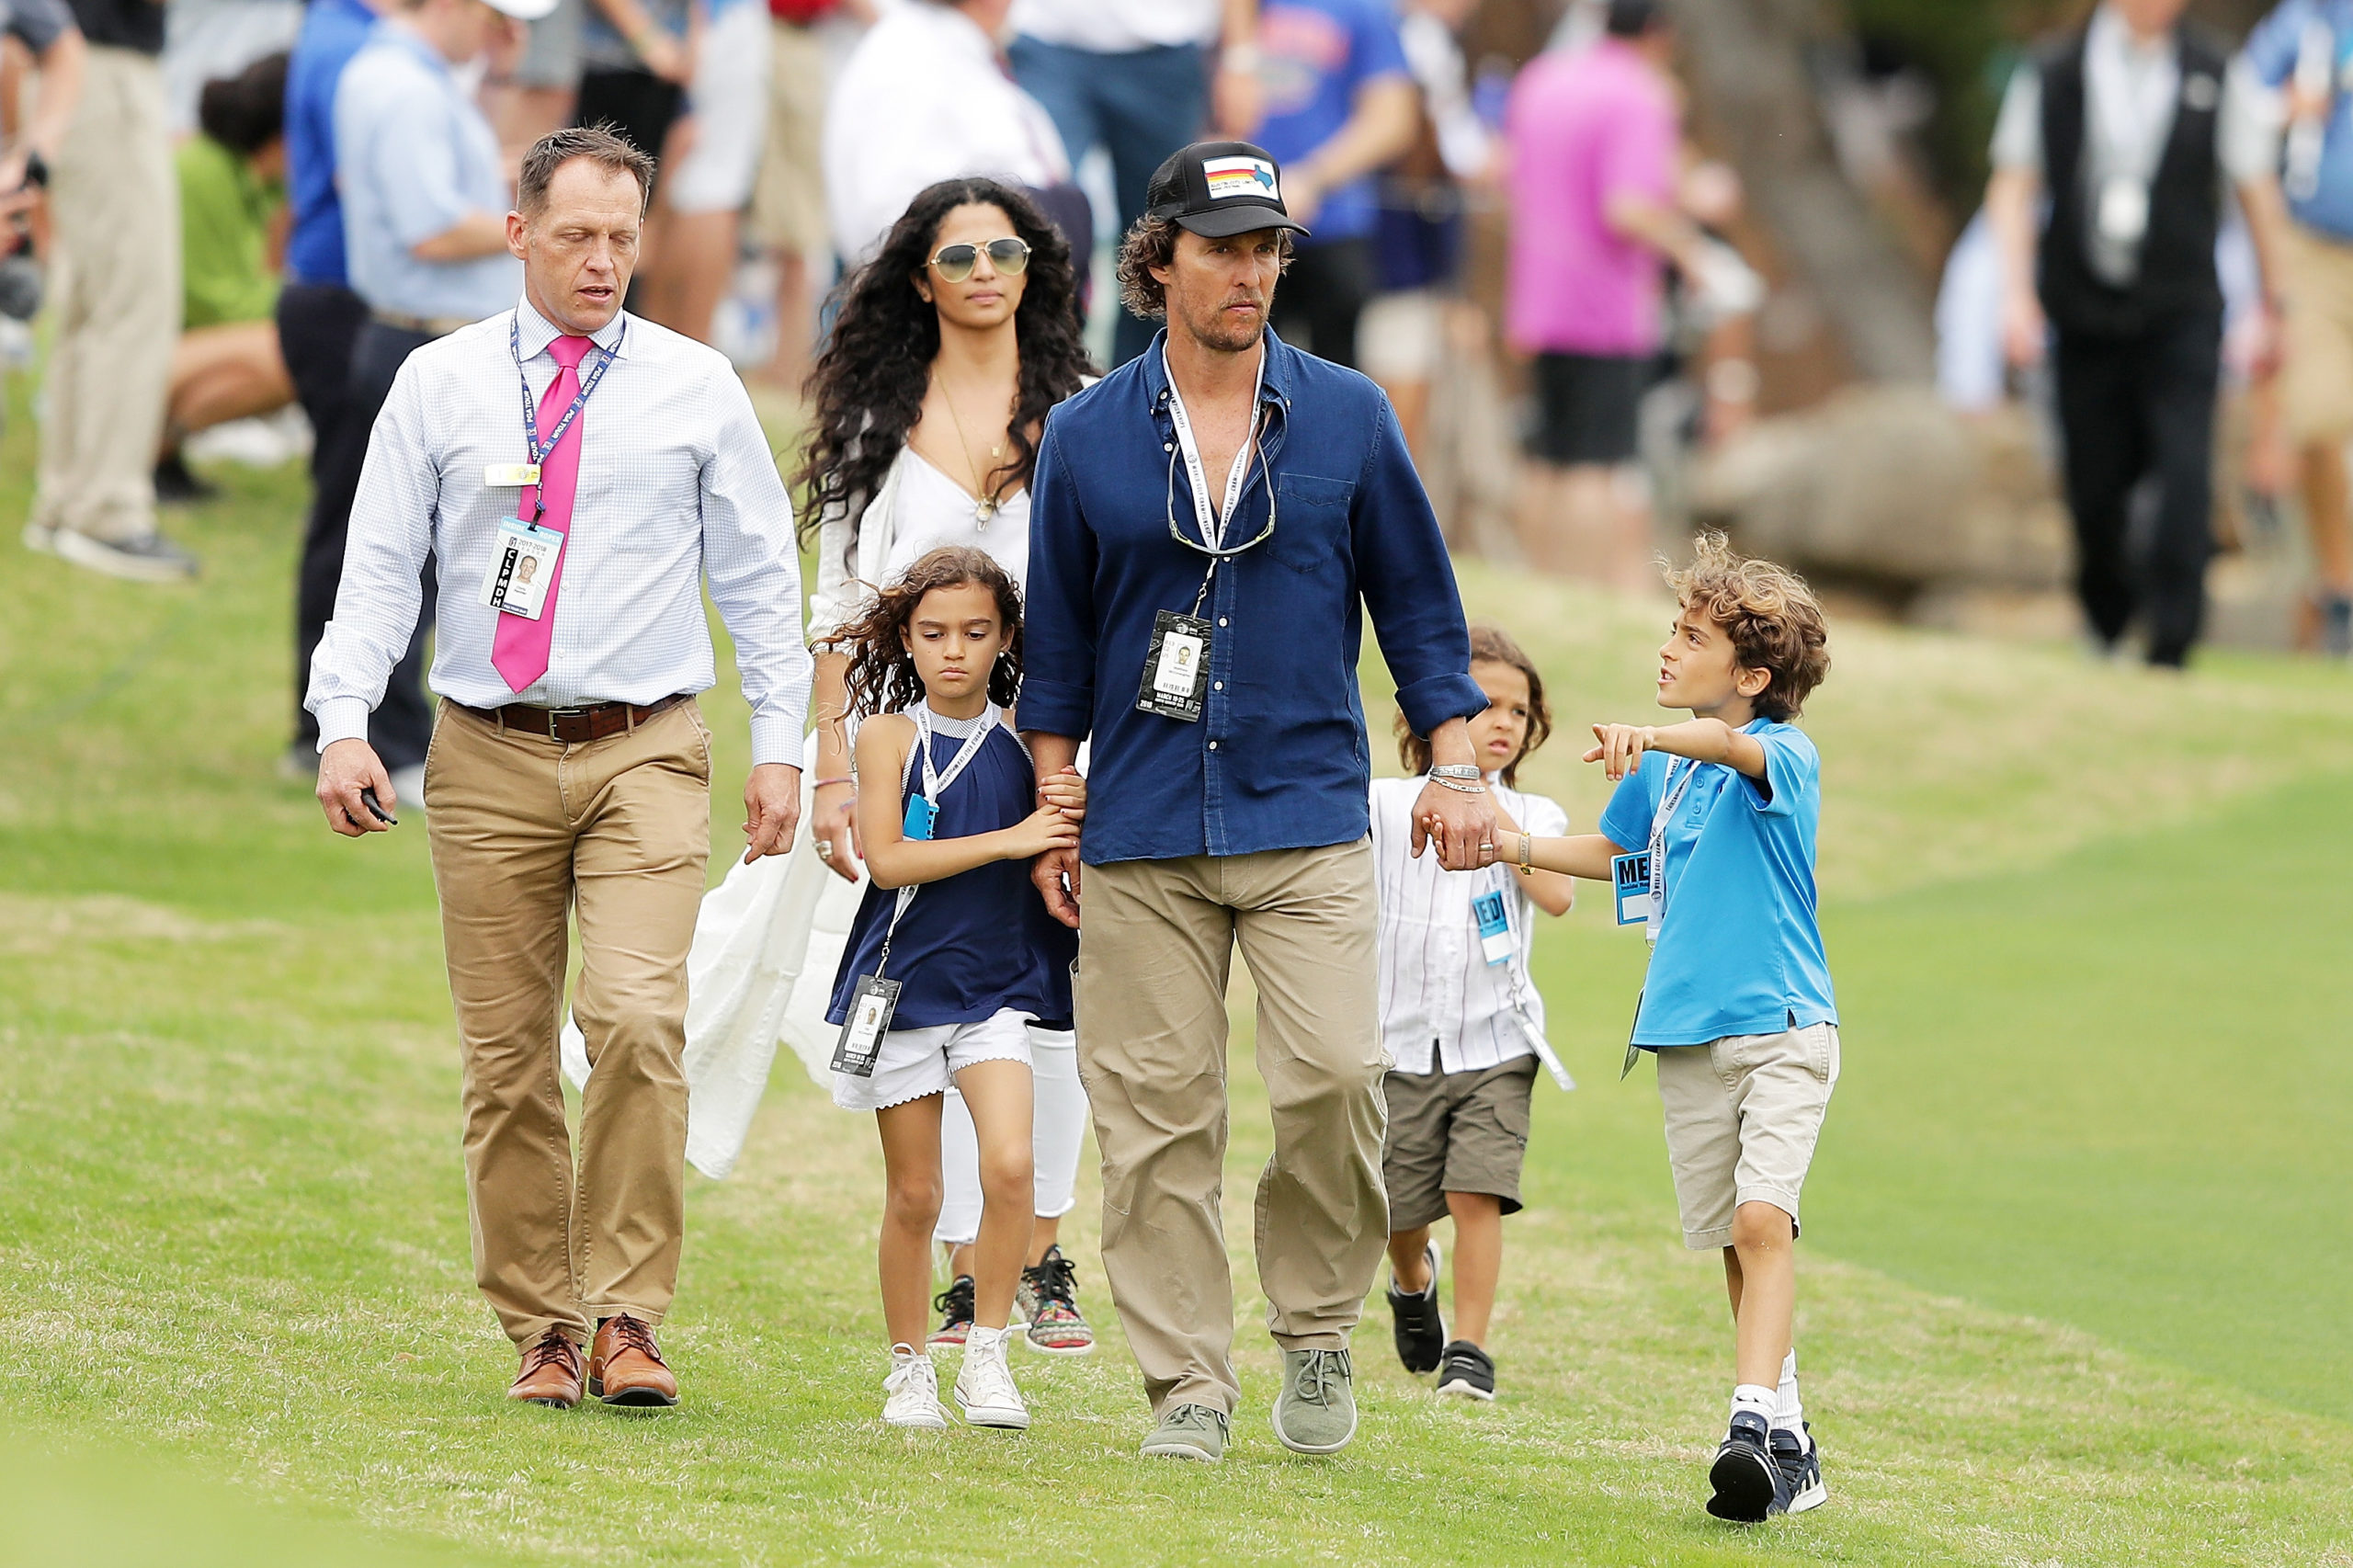 AUSTIN, TX - MARCH 25: Actors Matthew McConaughey, Camila Alves and their children Levi, Vida and Livingston attend the final round of the World Golf Championships-Dell Match Play at Austin Country Club on March 25, 2018 in Austin, Texas. (Photo by Richard Heathcote/Getty Images)